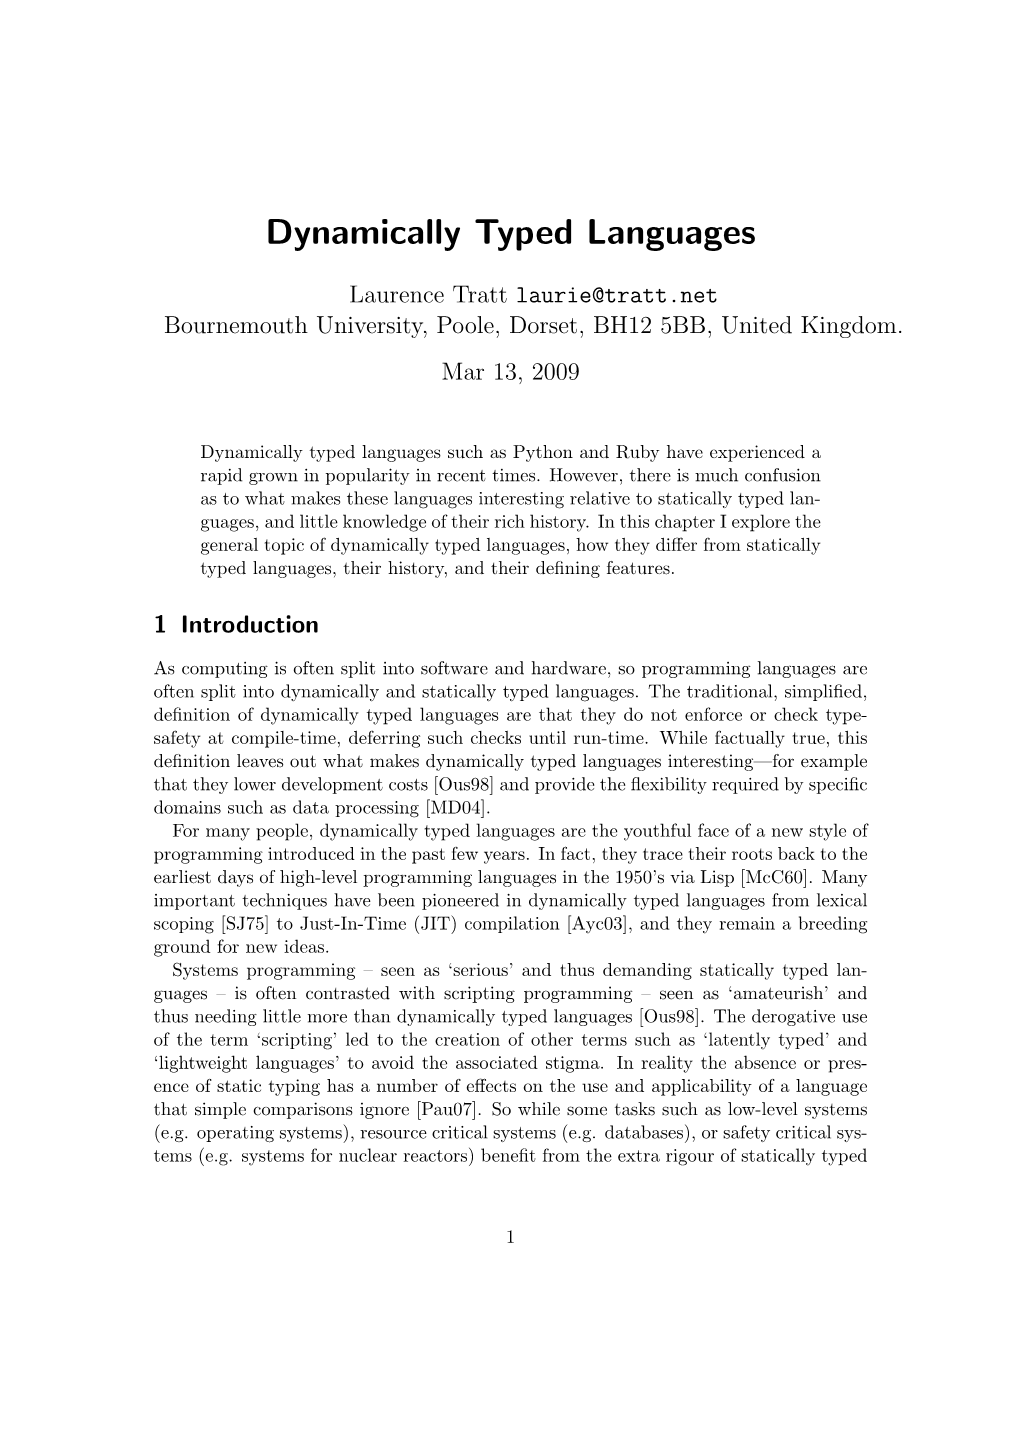 Dynamically Typed Languages